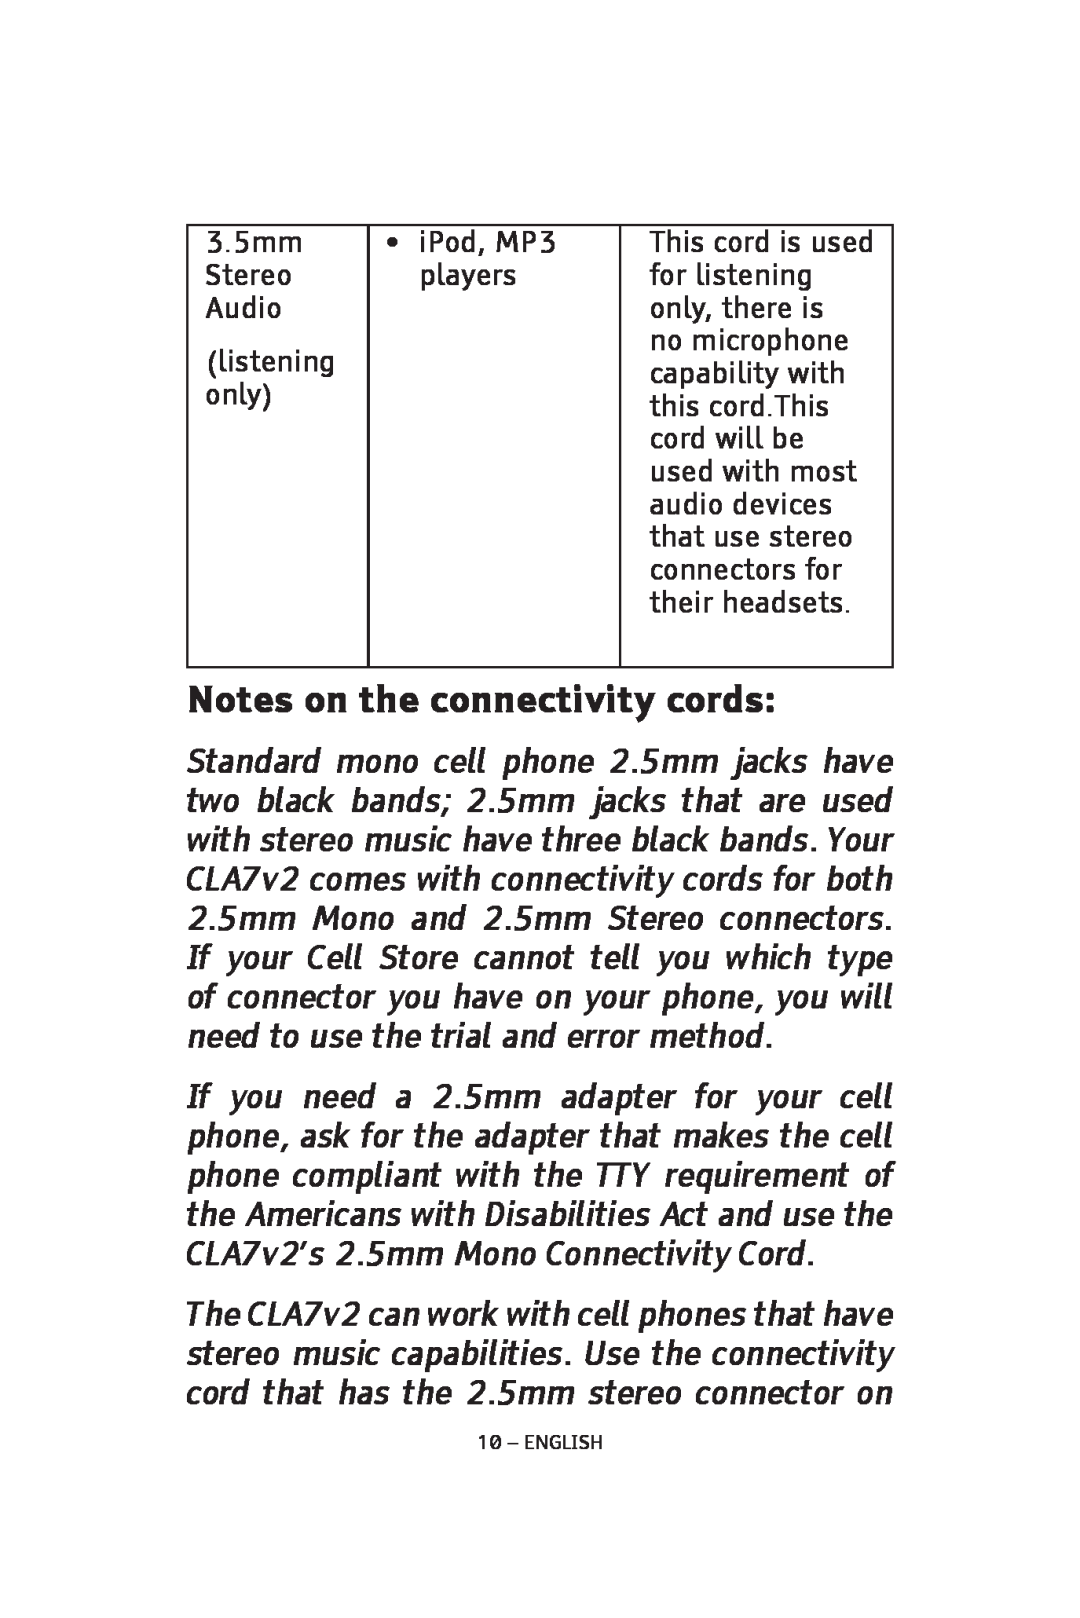 ClearSounds CLA7V2 manual Notes on the connectivity cords 